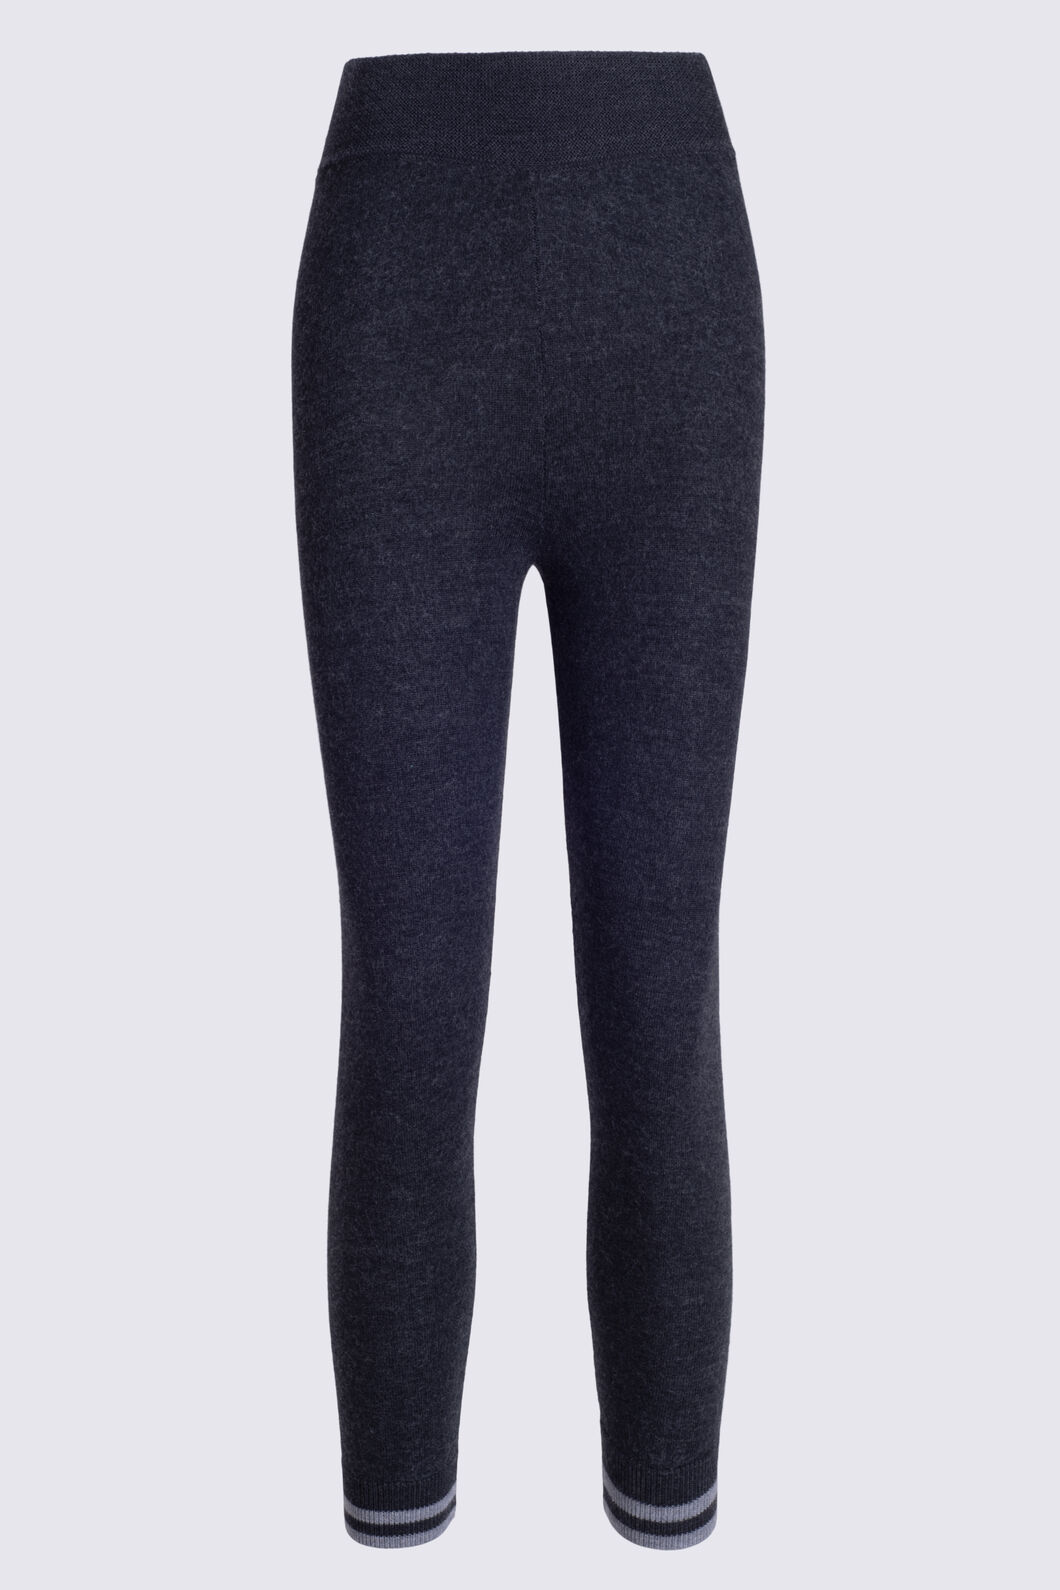 Clearance | Womens Thermals | Macpac